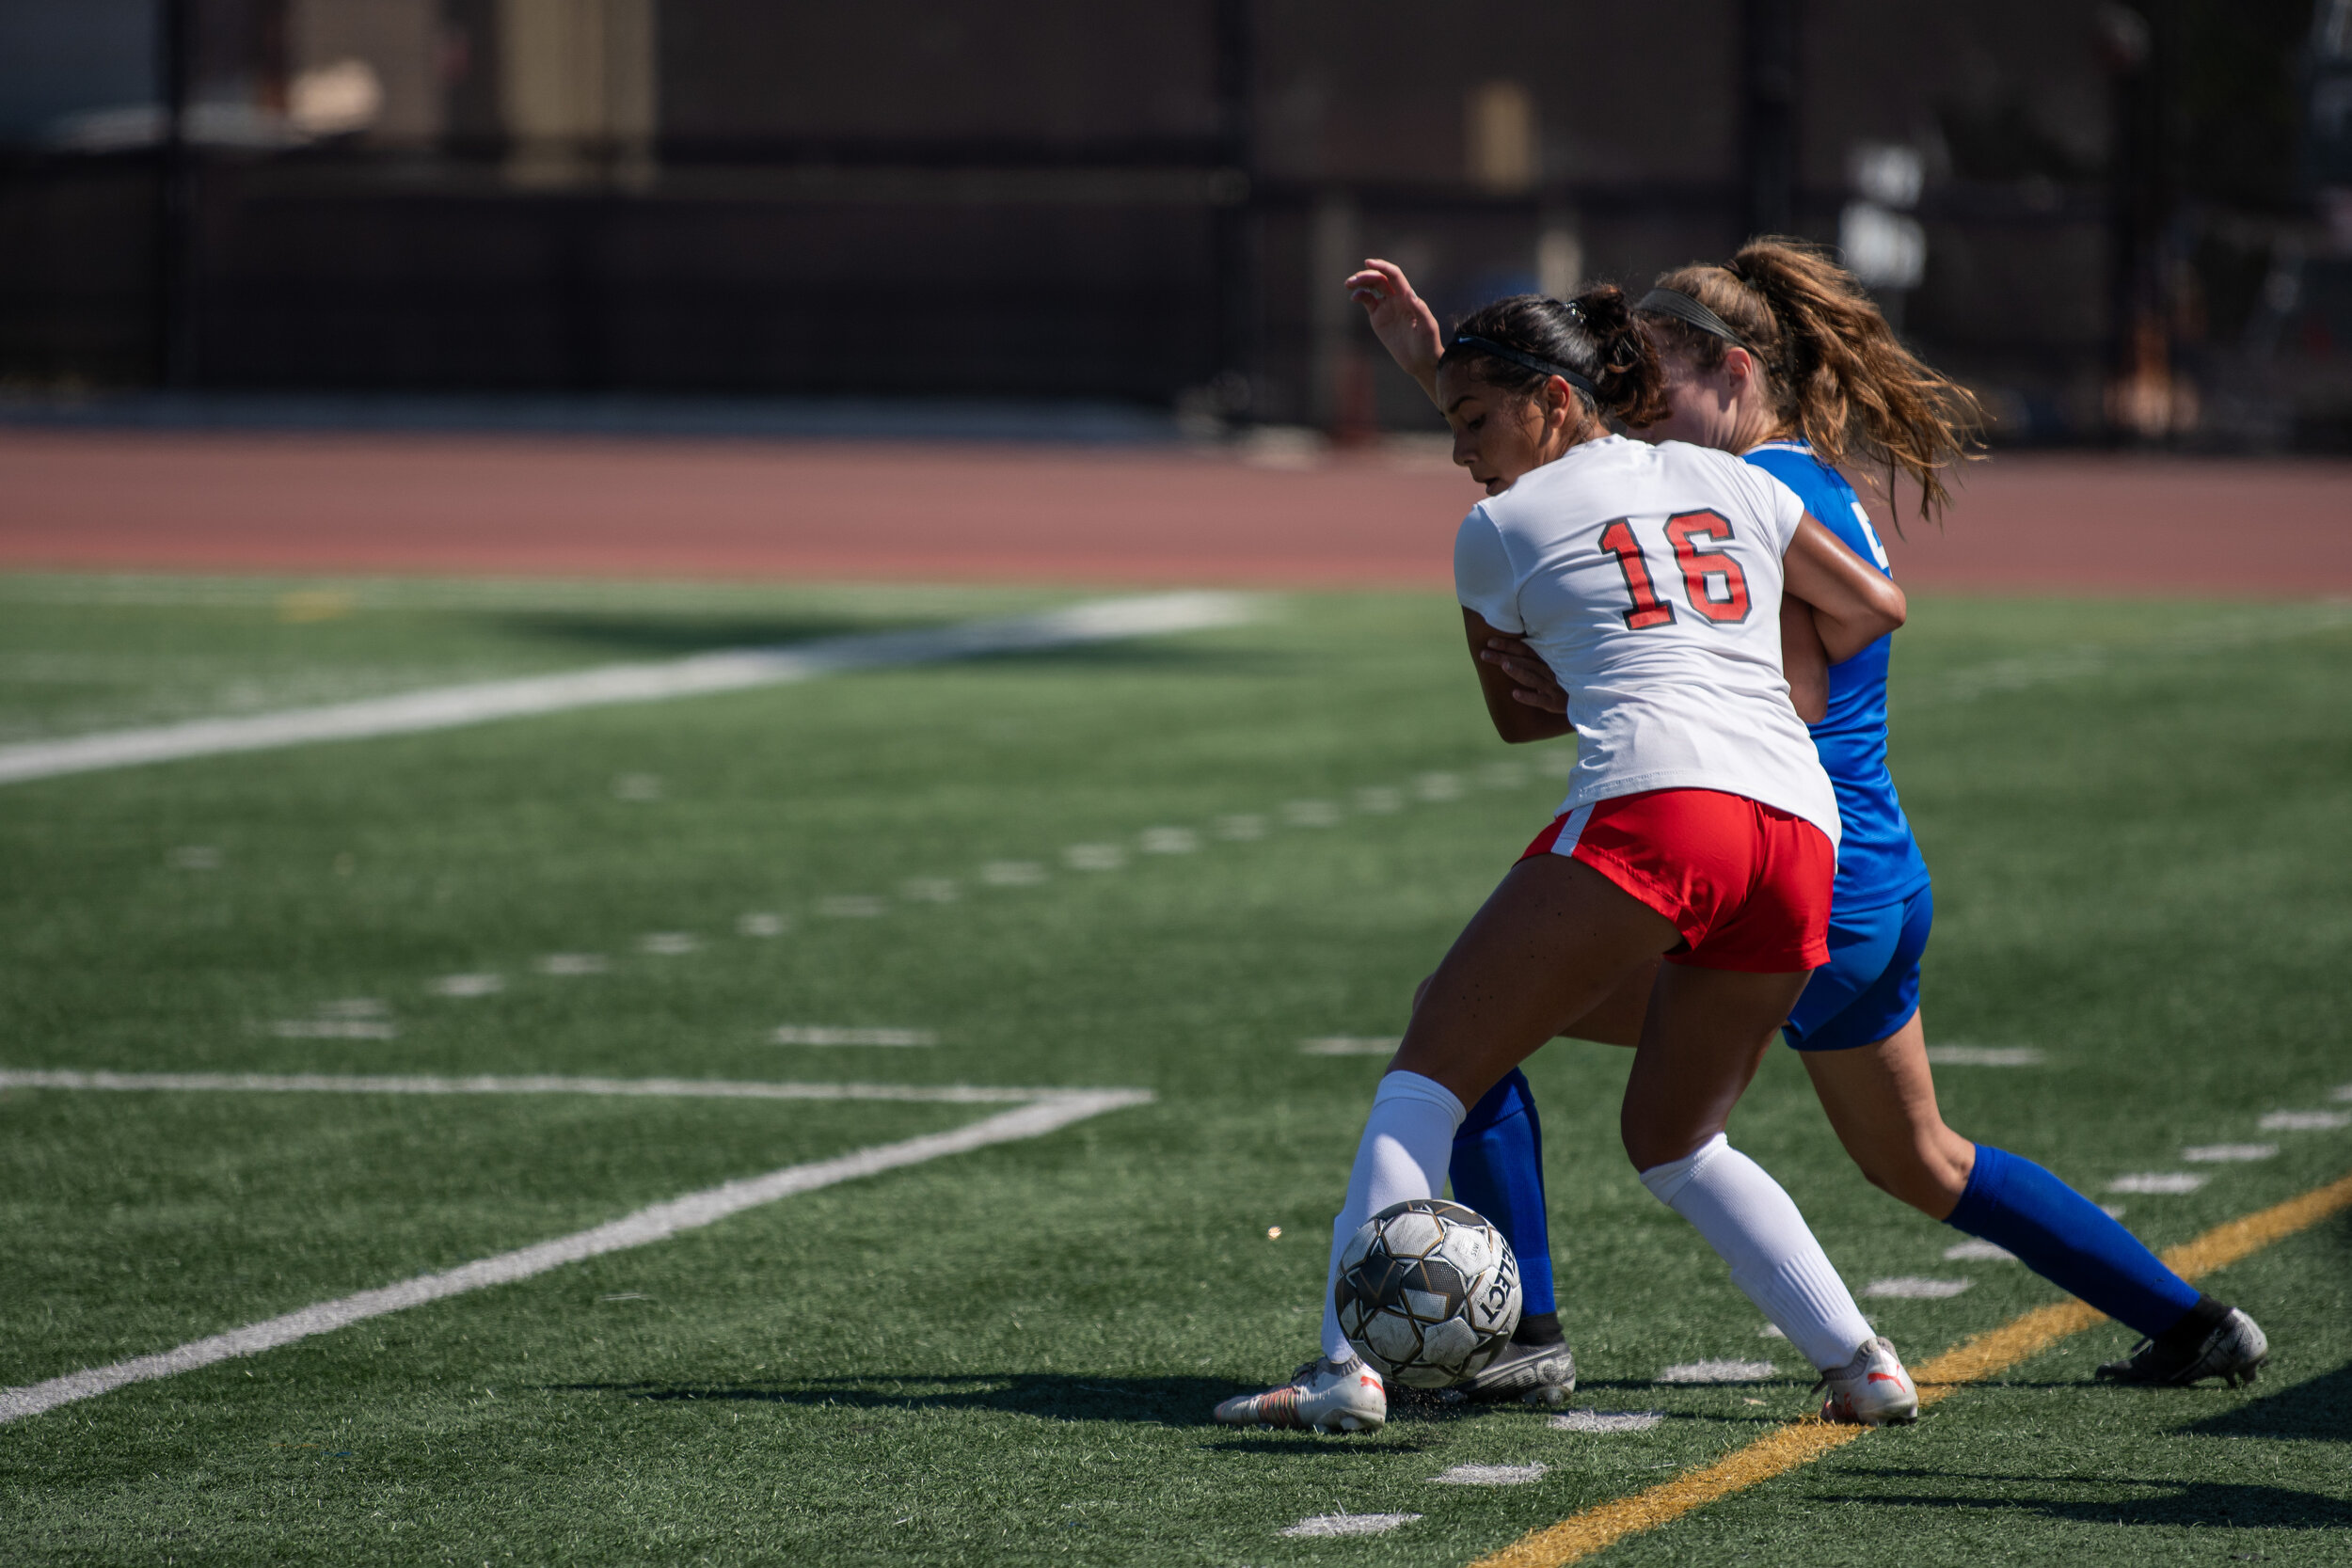  Charlie Kayem of the Santa Monica College woman's soccer team jockeys for ball possesion with a Charlie College team member on the Santa Monica College Corsair Field in Santa Monica, Calif. on September 10, 2021. The match against Chaffey is their t